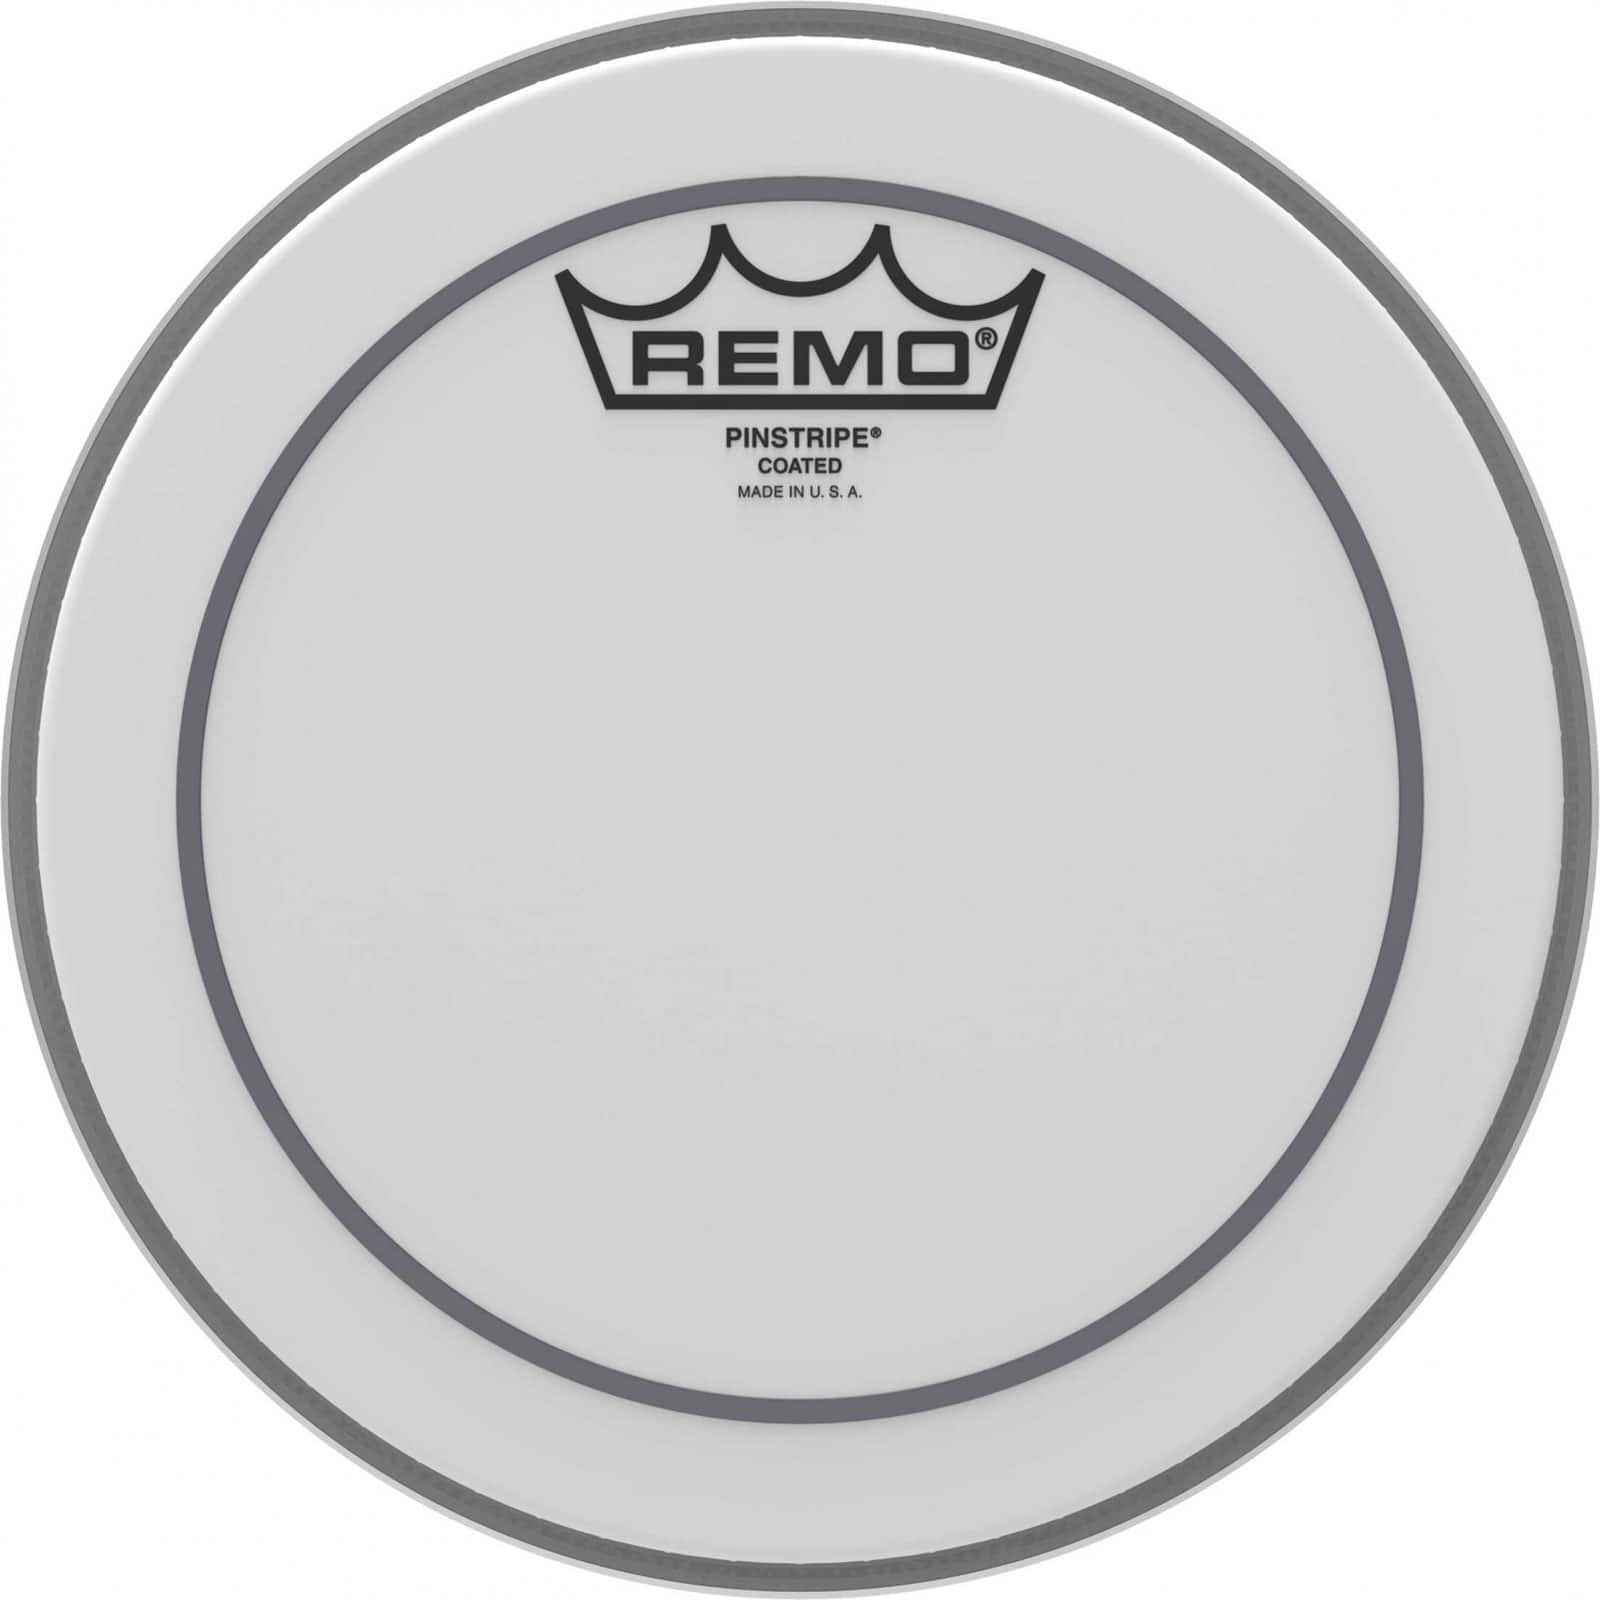 REMO PS-0108-00 - PINSTRIPE COATED 8